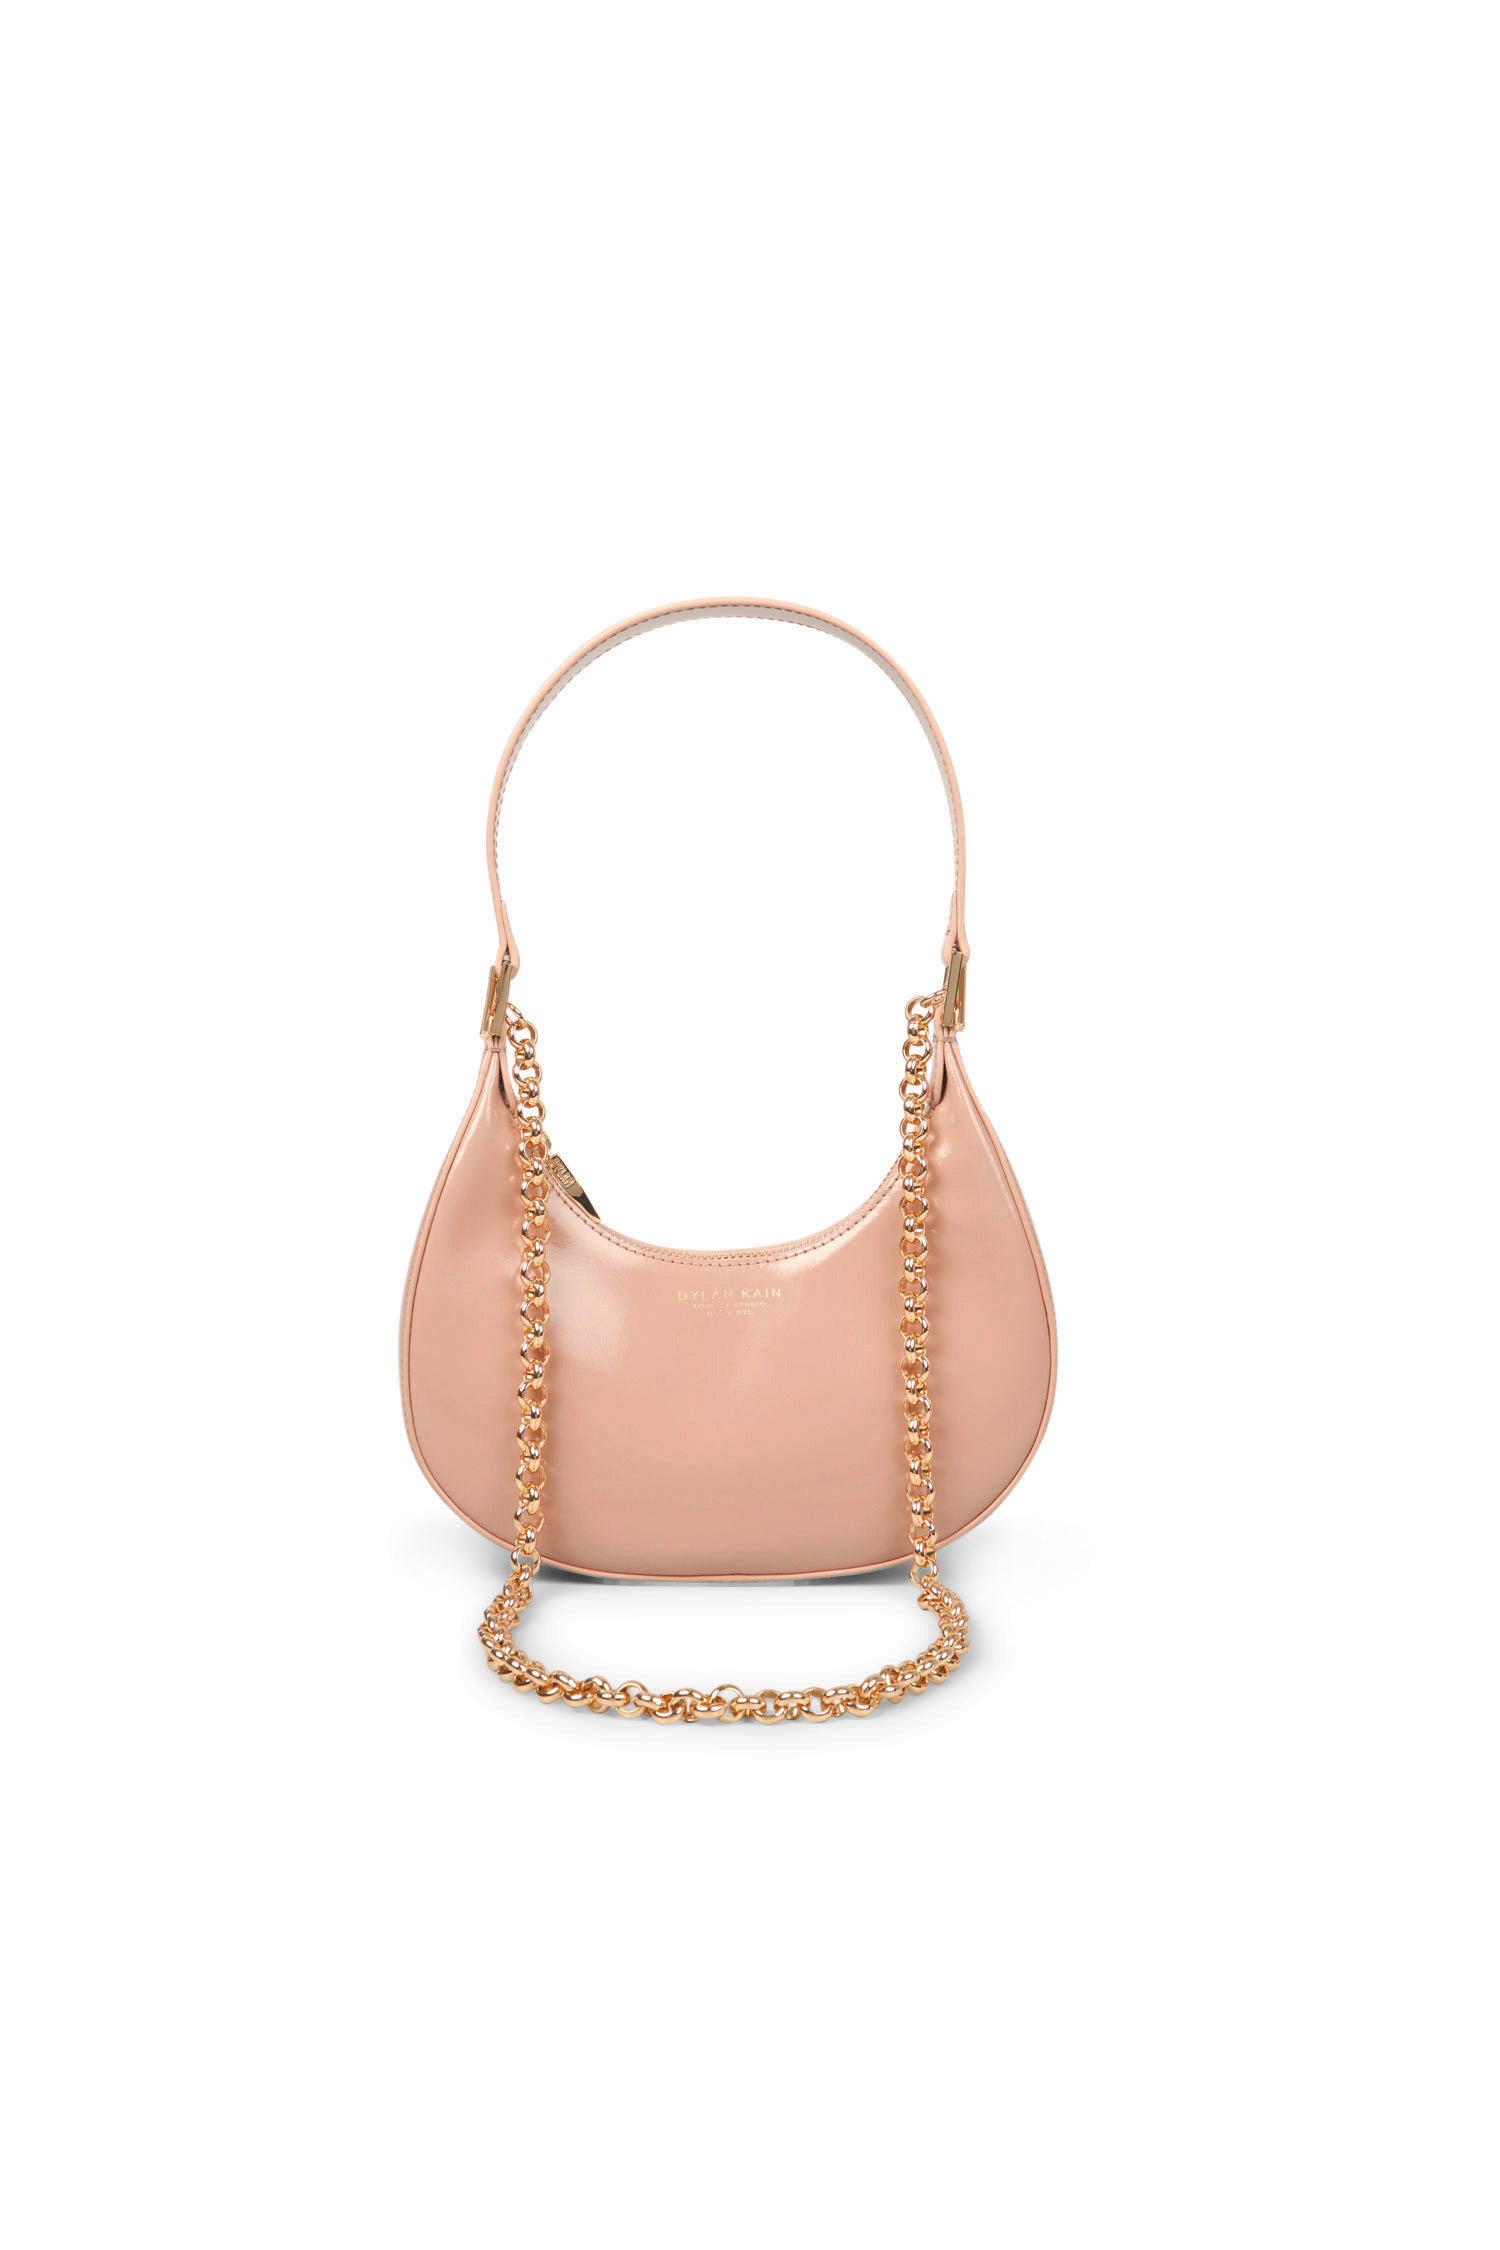 The Rhea Sling Patent Bag Fawn